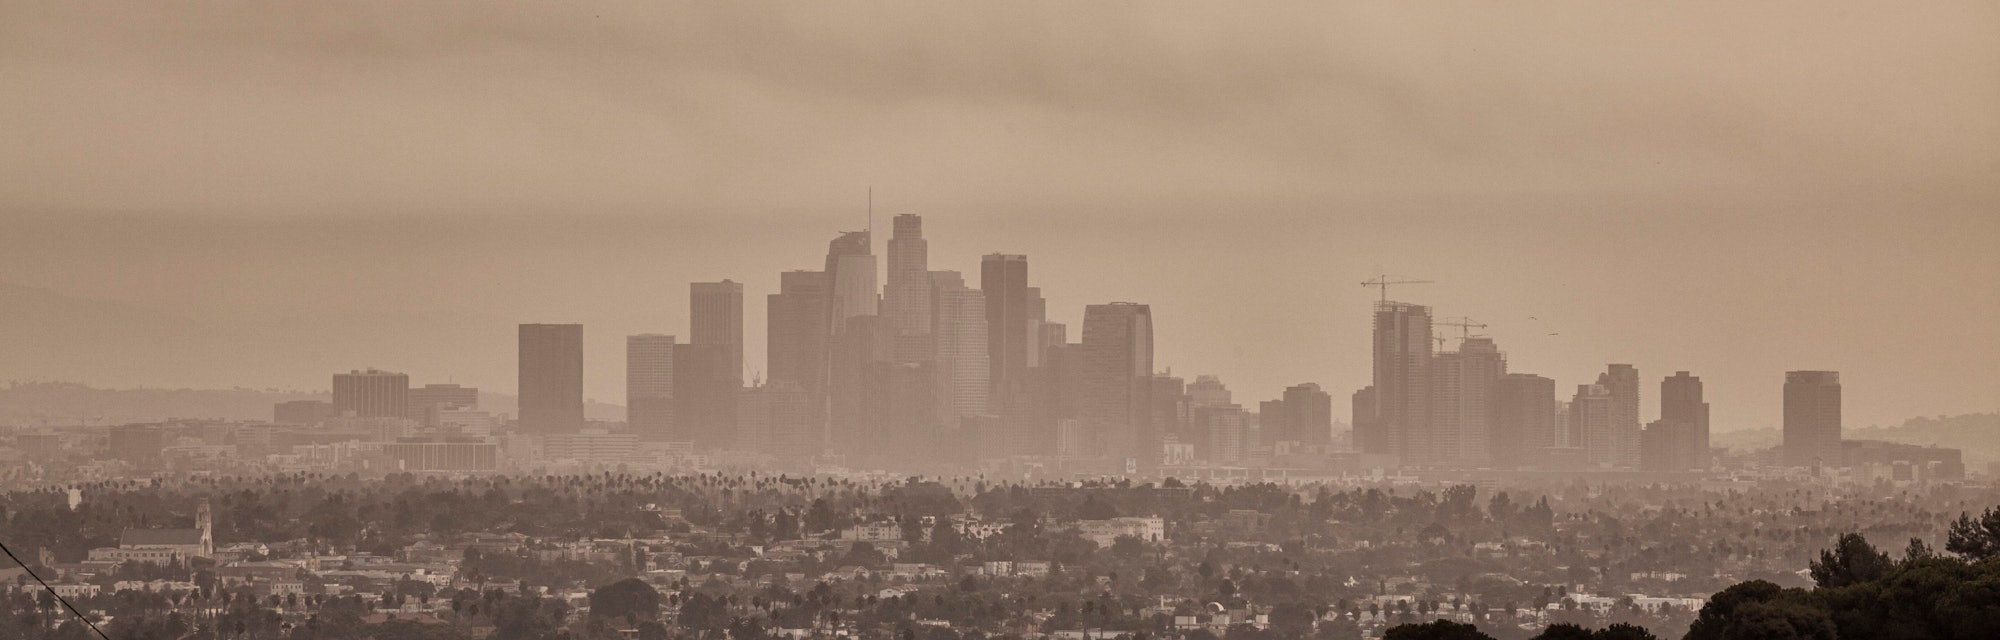 In early September 2020, Los Angeles was blanketed each day with smoke and ash from nearby wildfires...